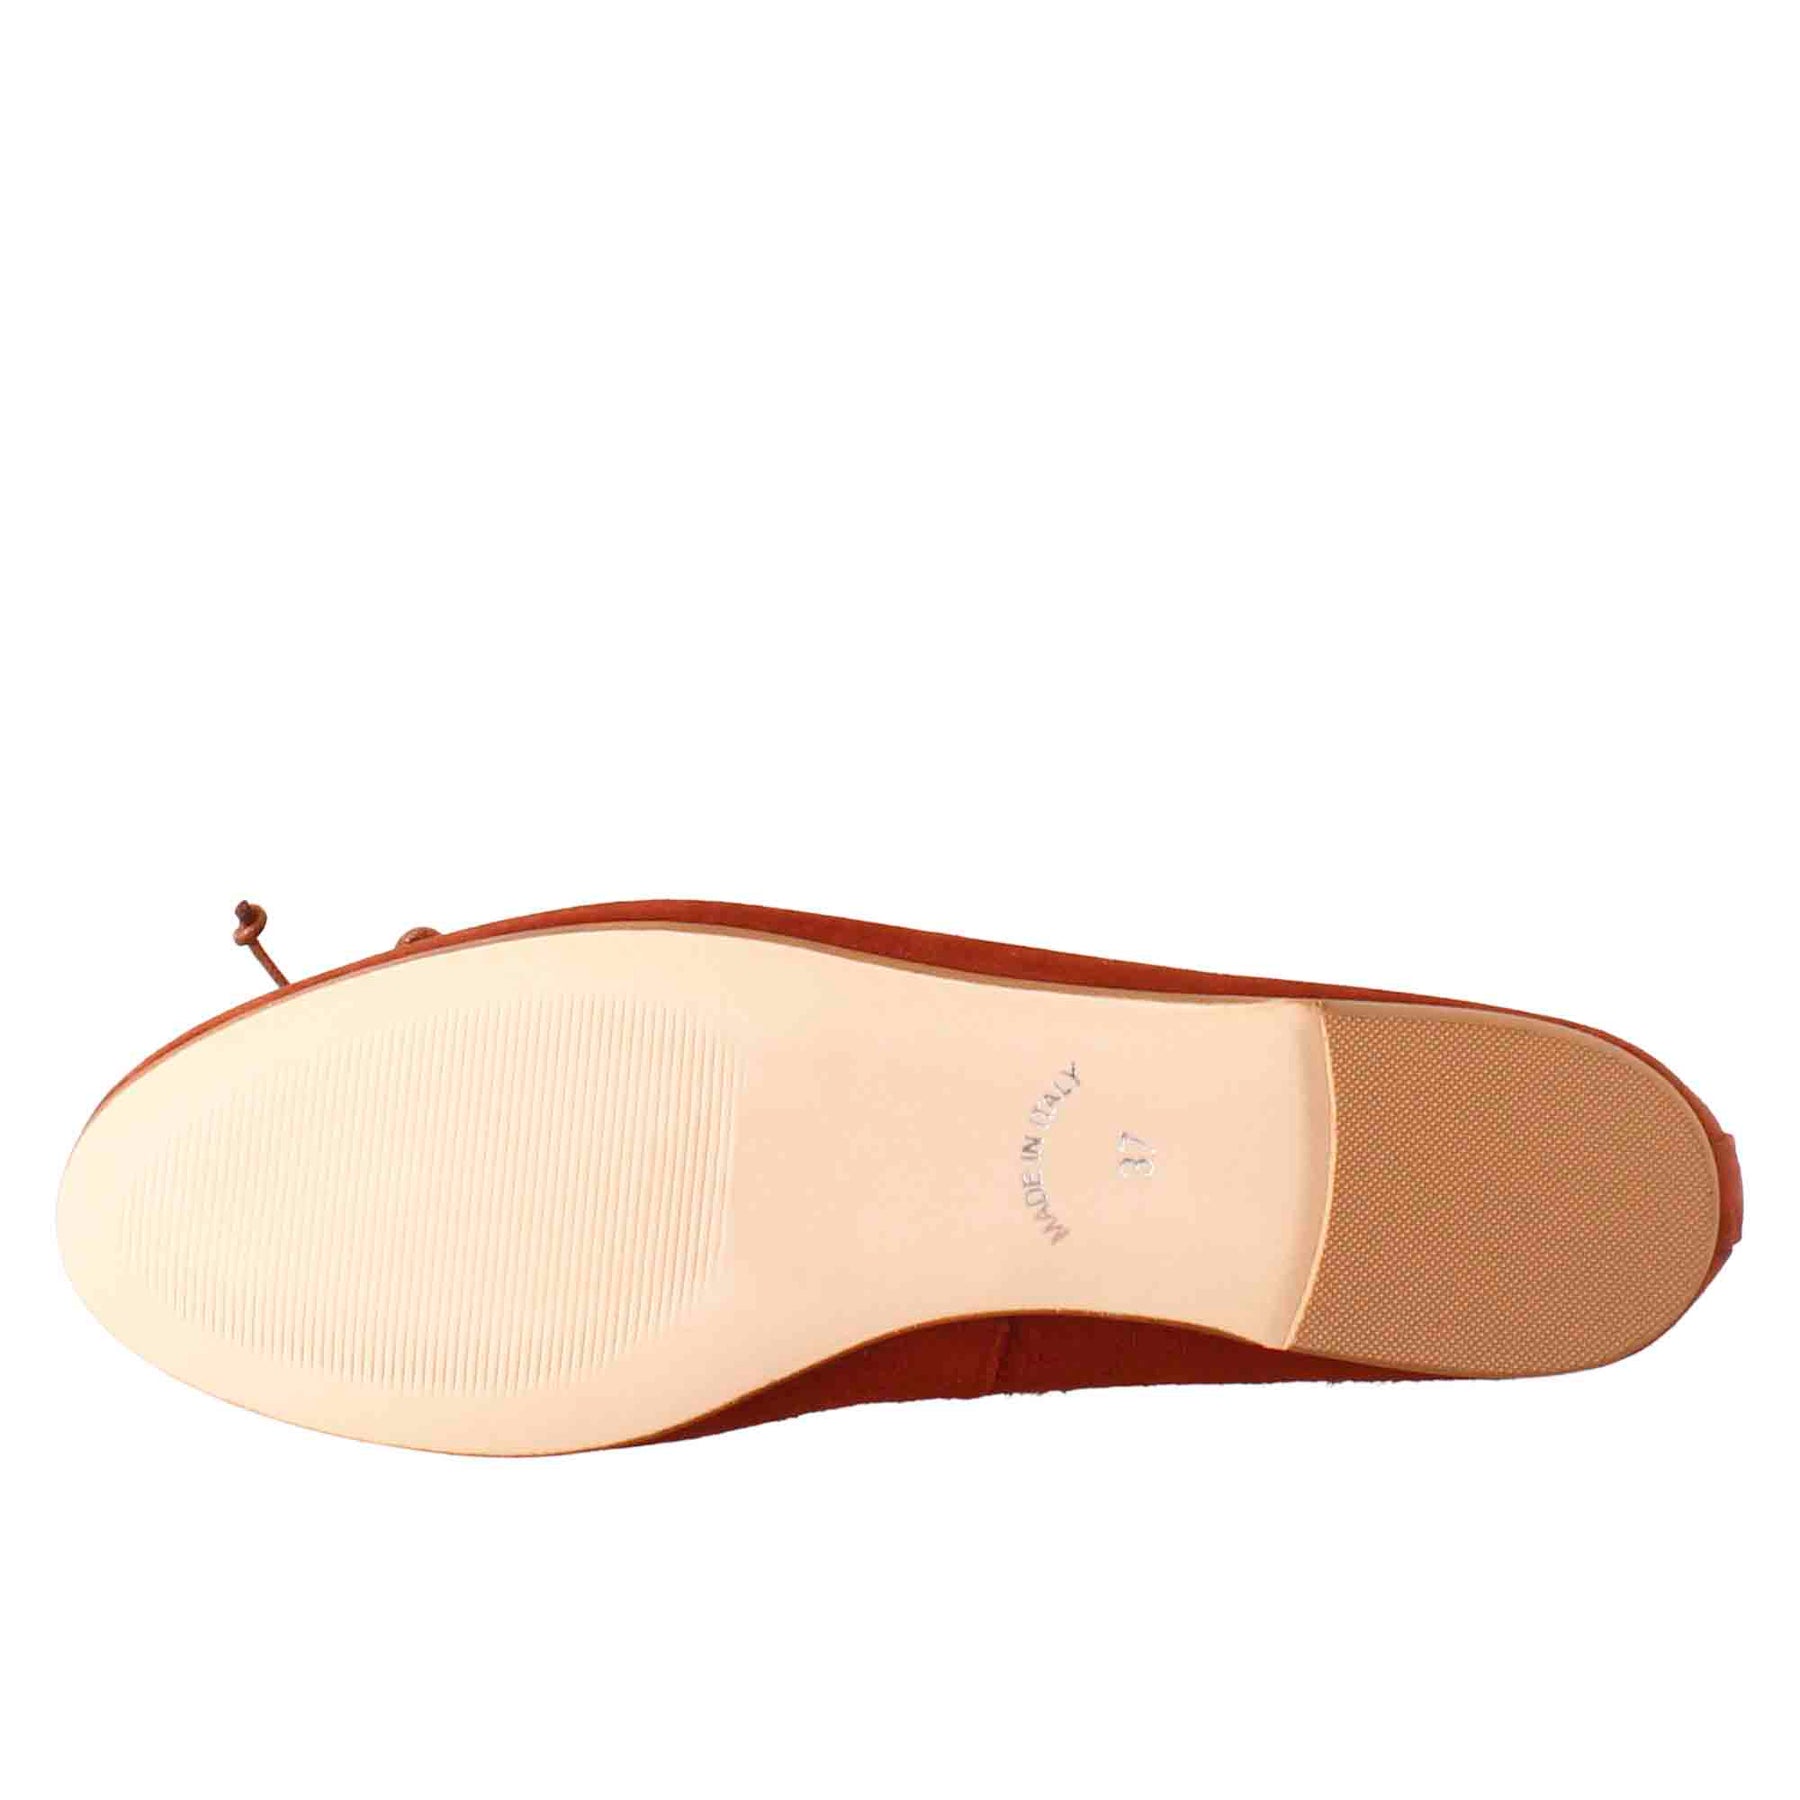 Light brick-colored women's ballet flats in suede without lining